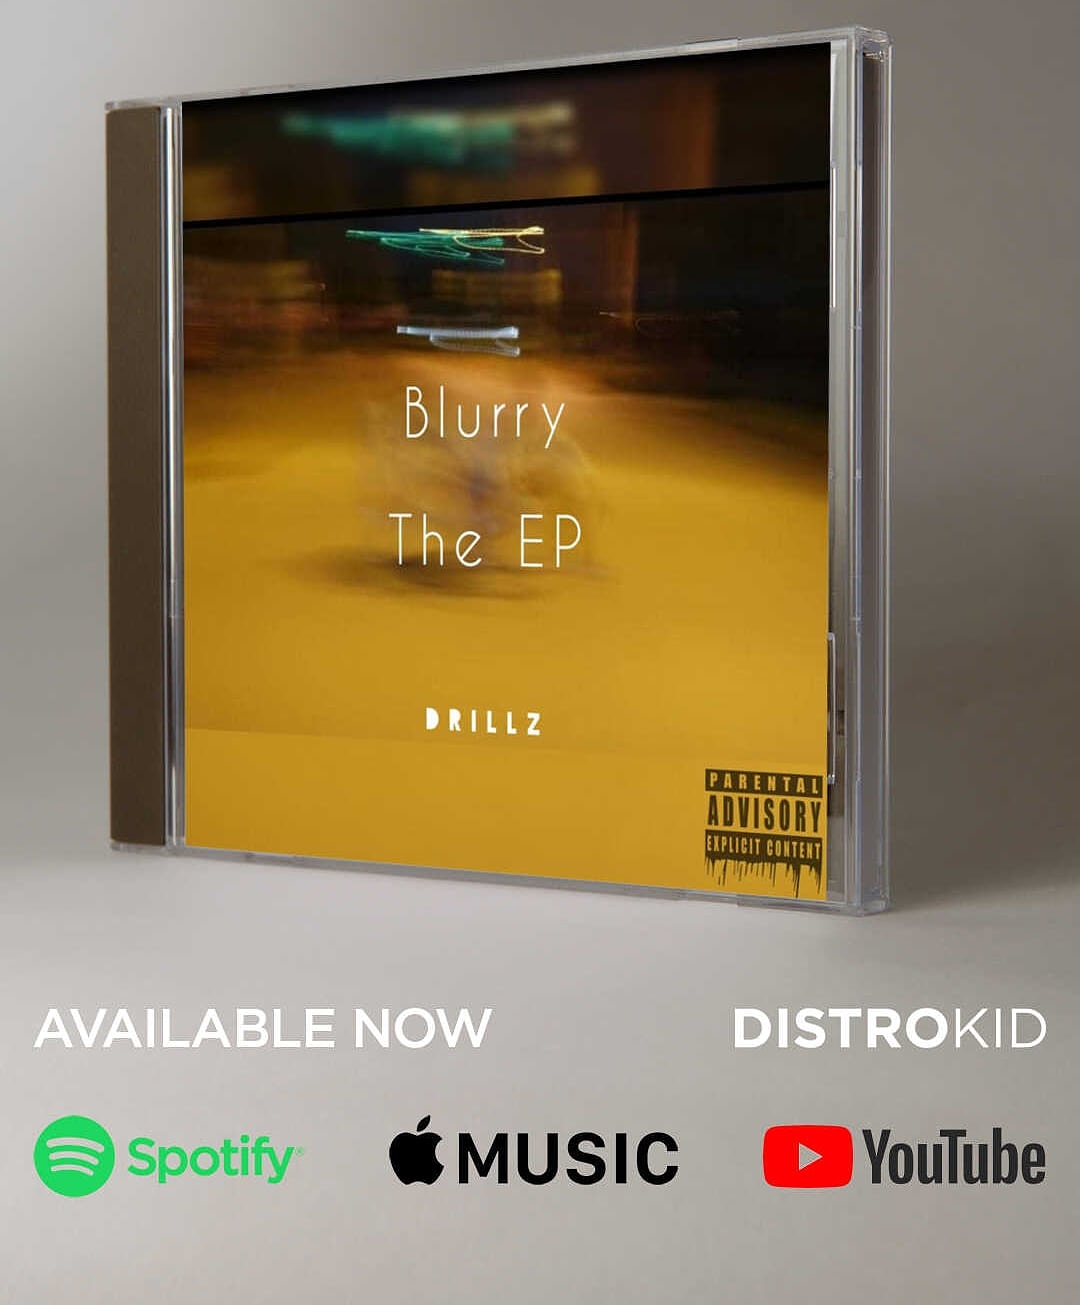 Listen to Blurry EP by Drillz